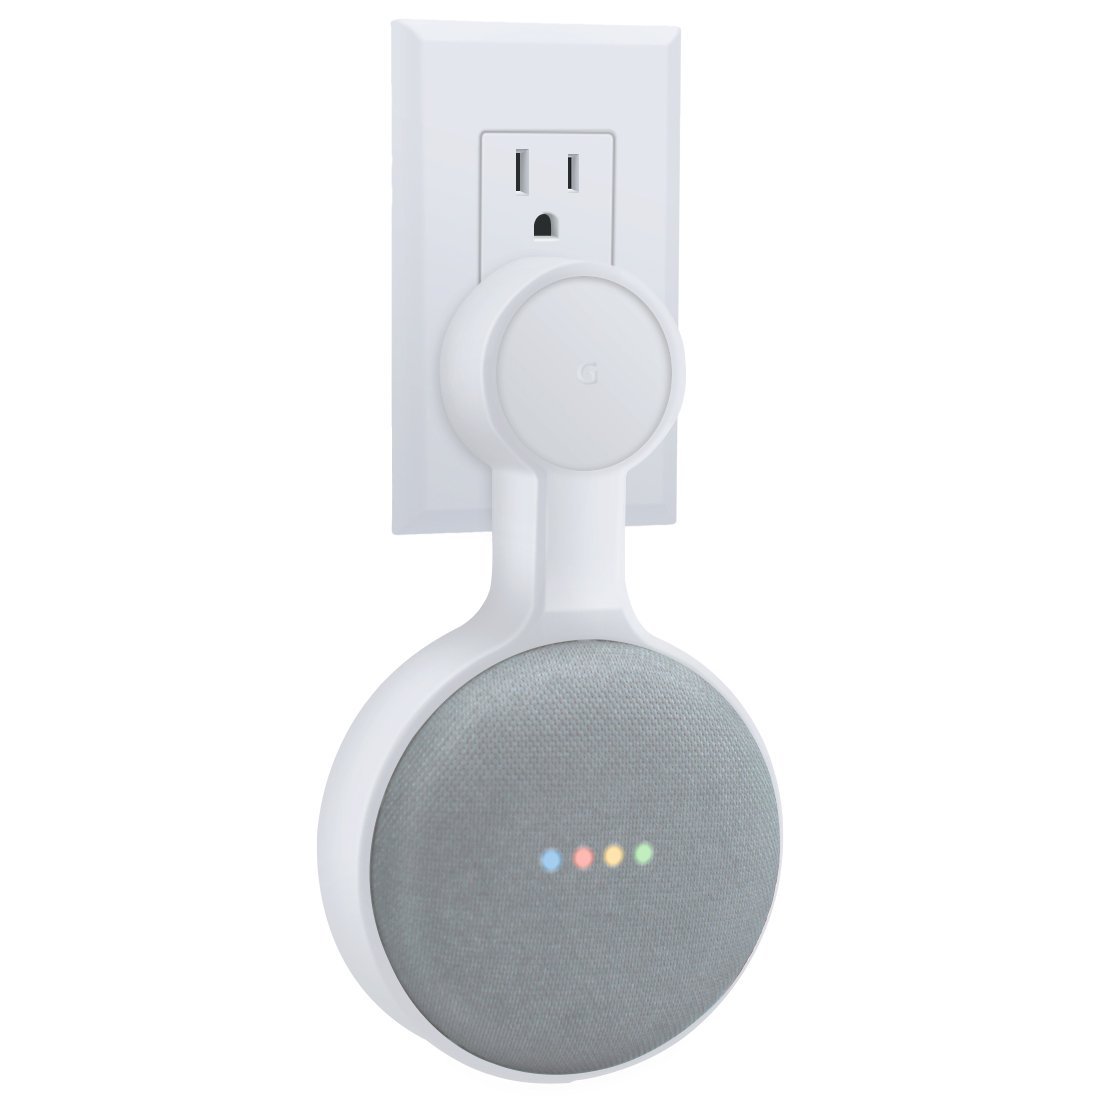 AMORTEK Outlet Wall Mount Holder for Google Home Mini, A Space-Saving Accessories for Google Home Mini Voice Assistant